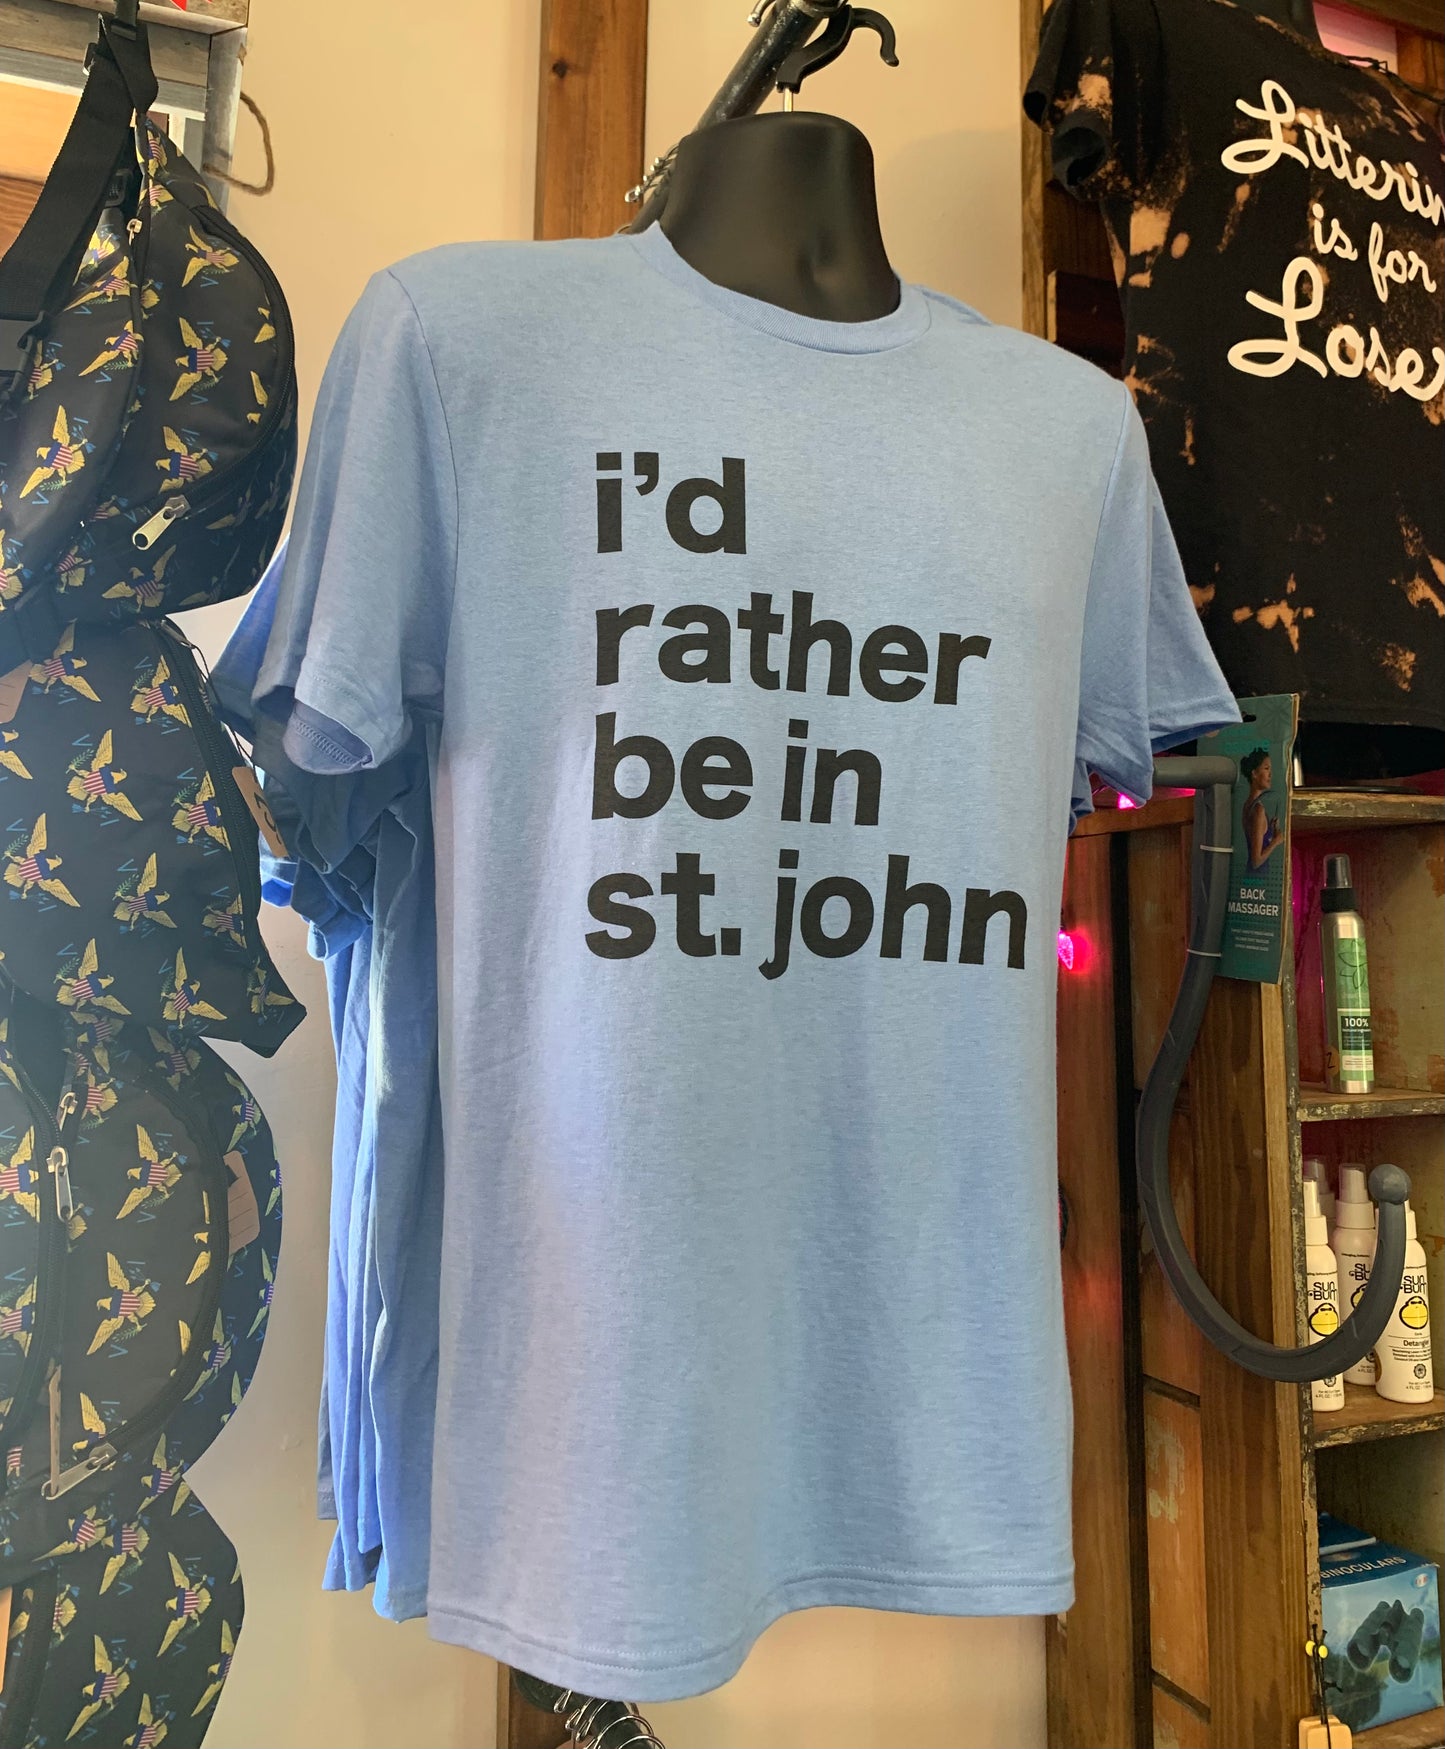 “I’d Rather Be in St. John” tee